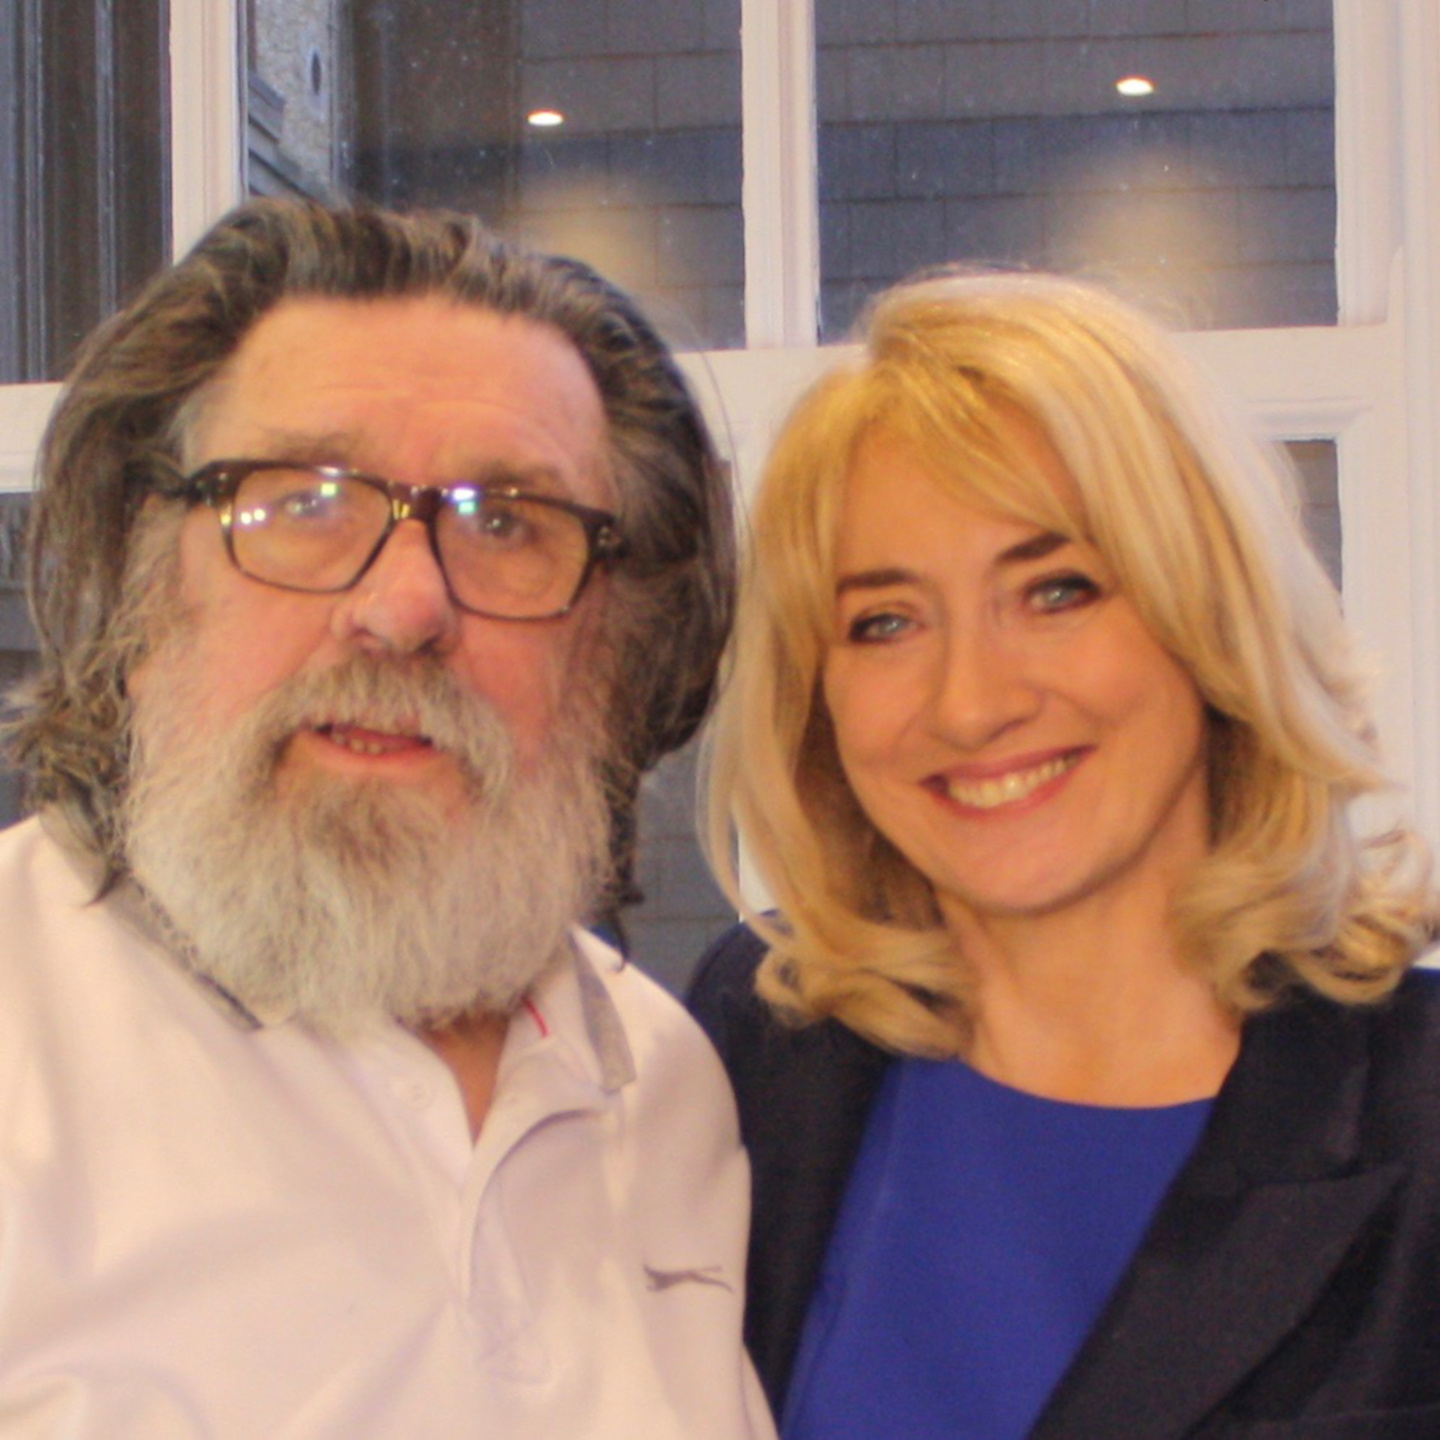 Episode 2: The Other Side with Theresa Lowe and guest Ricky Tomlinson Pt 1